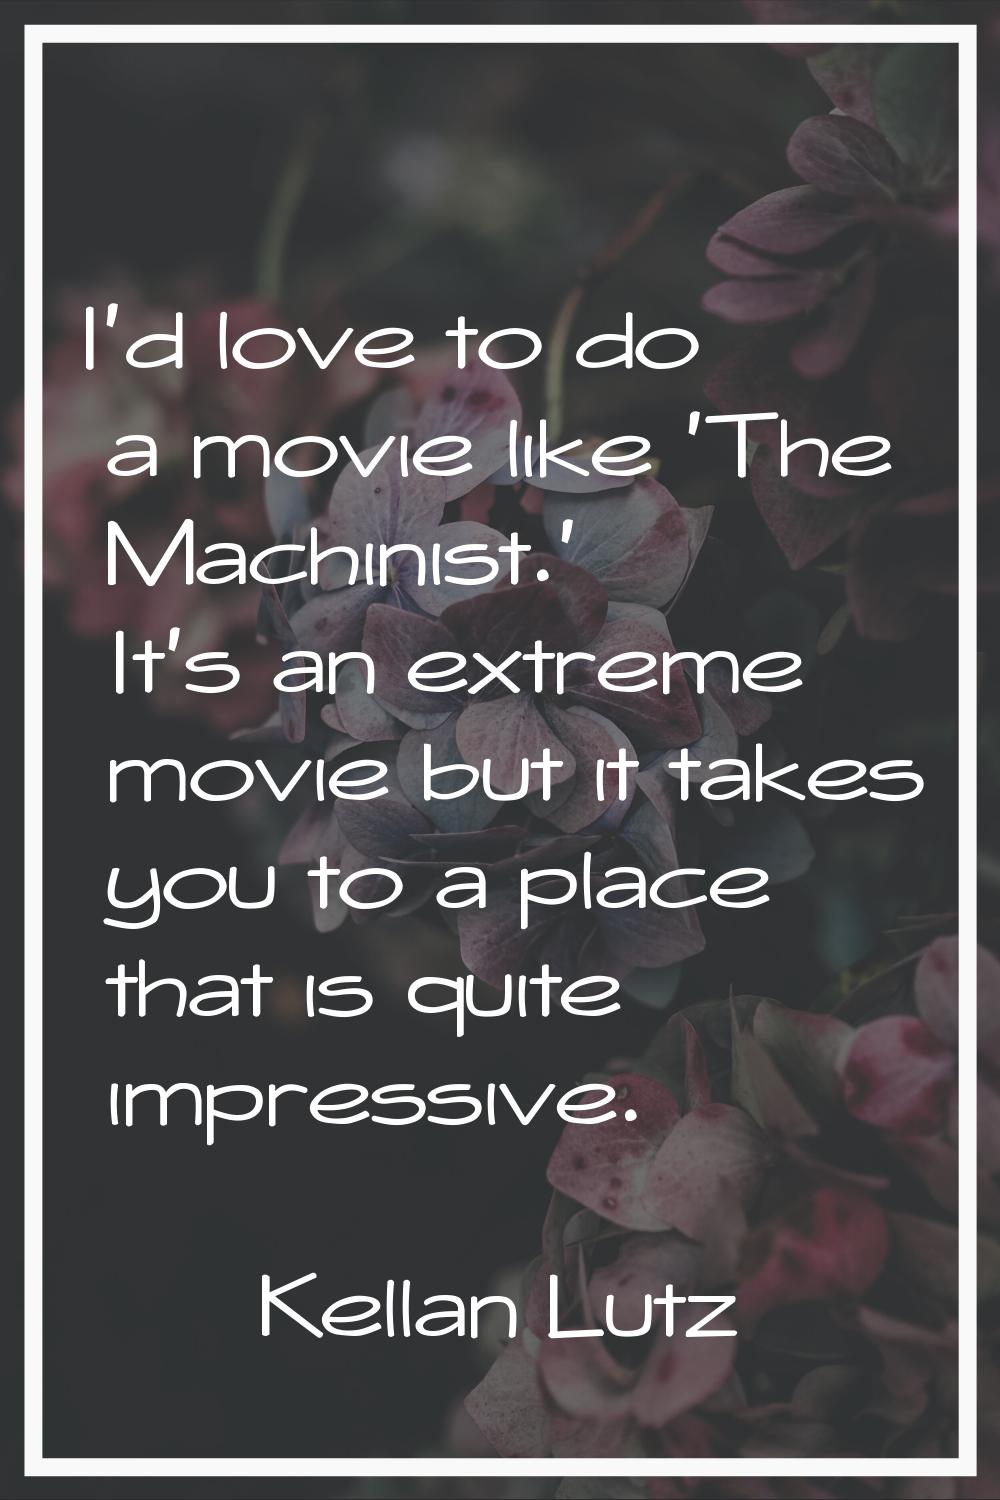 I'd love to do a movie like 'The Machinist.' It's an extreme movie but it takes you to a place that